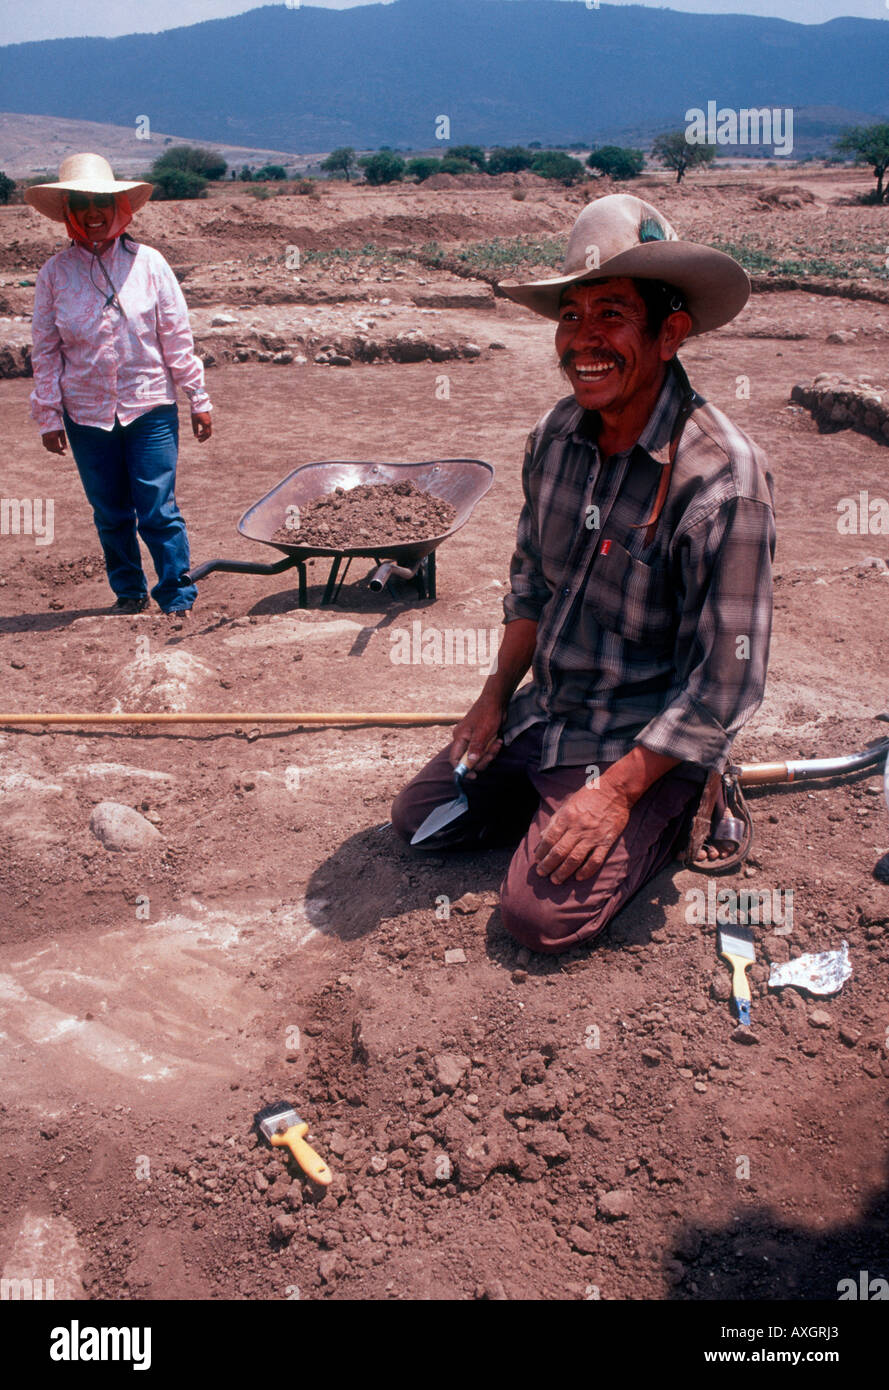 Archaeological dig project in oaxaca, south central Mexico uncovers 8th century AD Zapotec village. Stock Photo